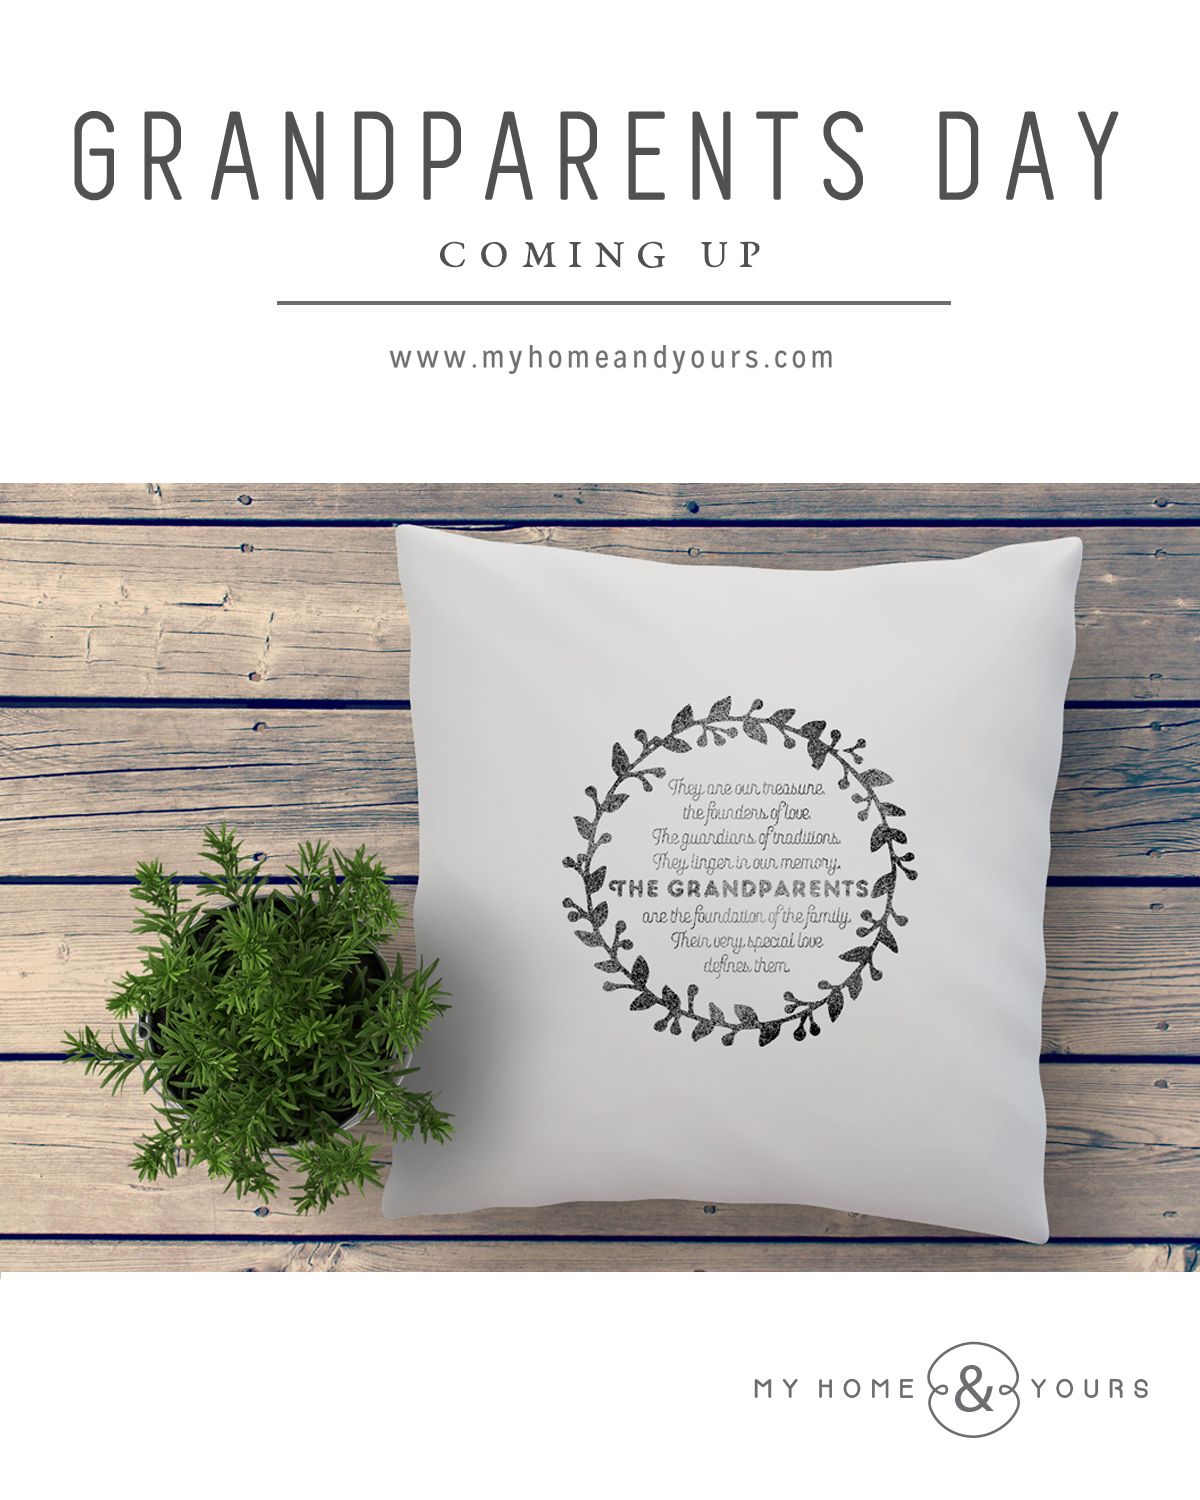 grandparents day what is it all about by my home and yours blog for design and family lovers